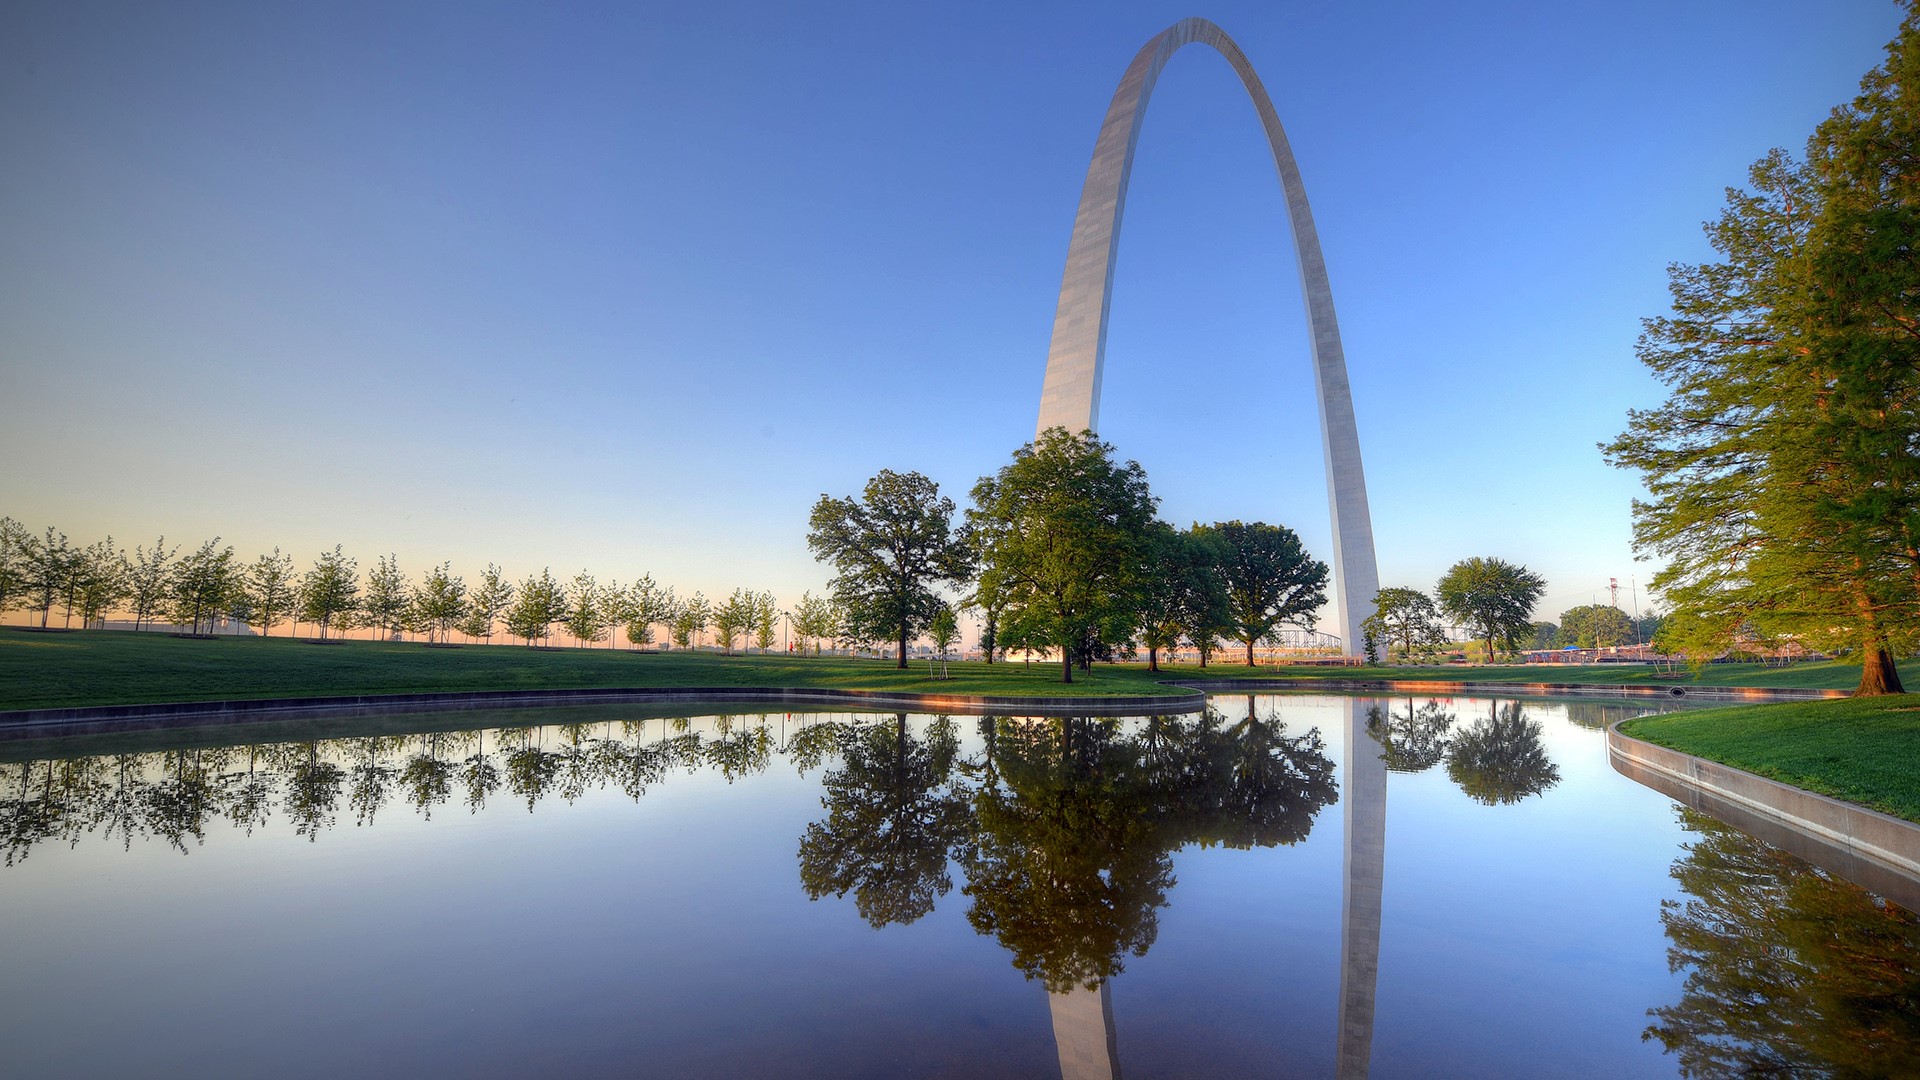 General 1920x1080 nature landscape sky water trees grass reflection Gateway Arch monuments St. Louis Missouri USA architecture